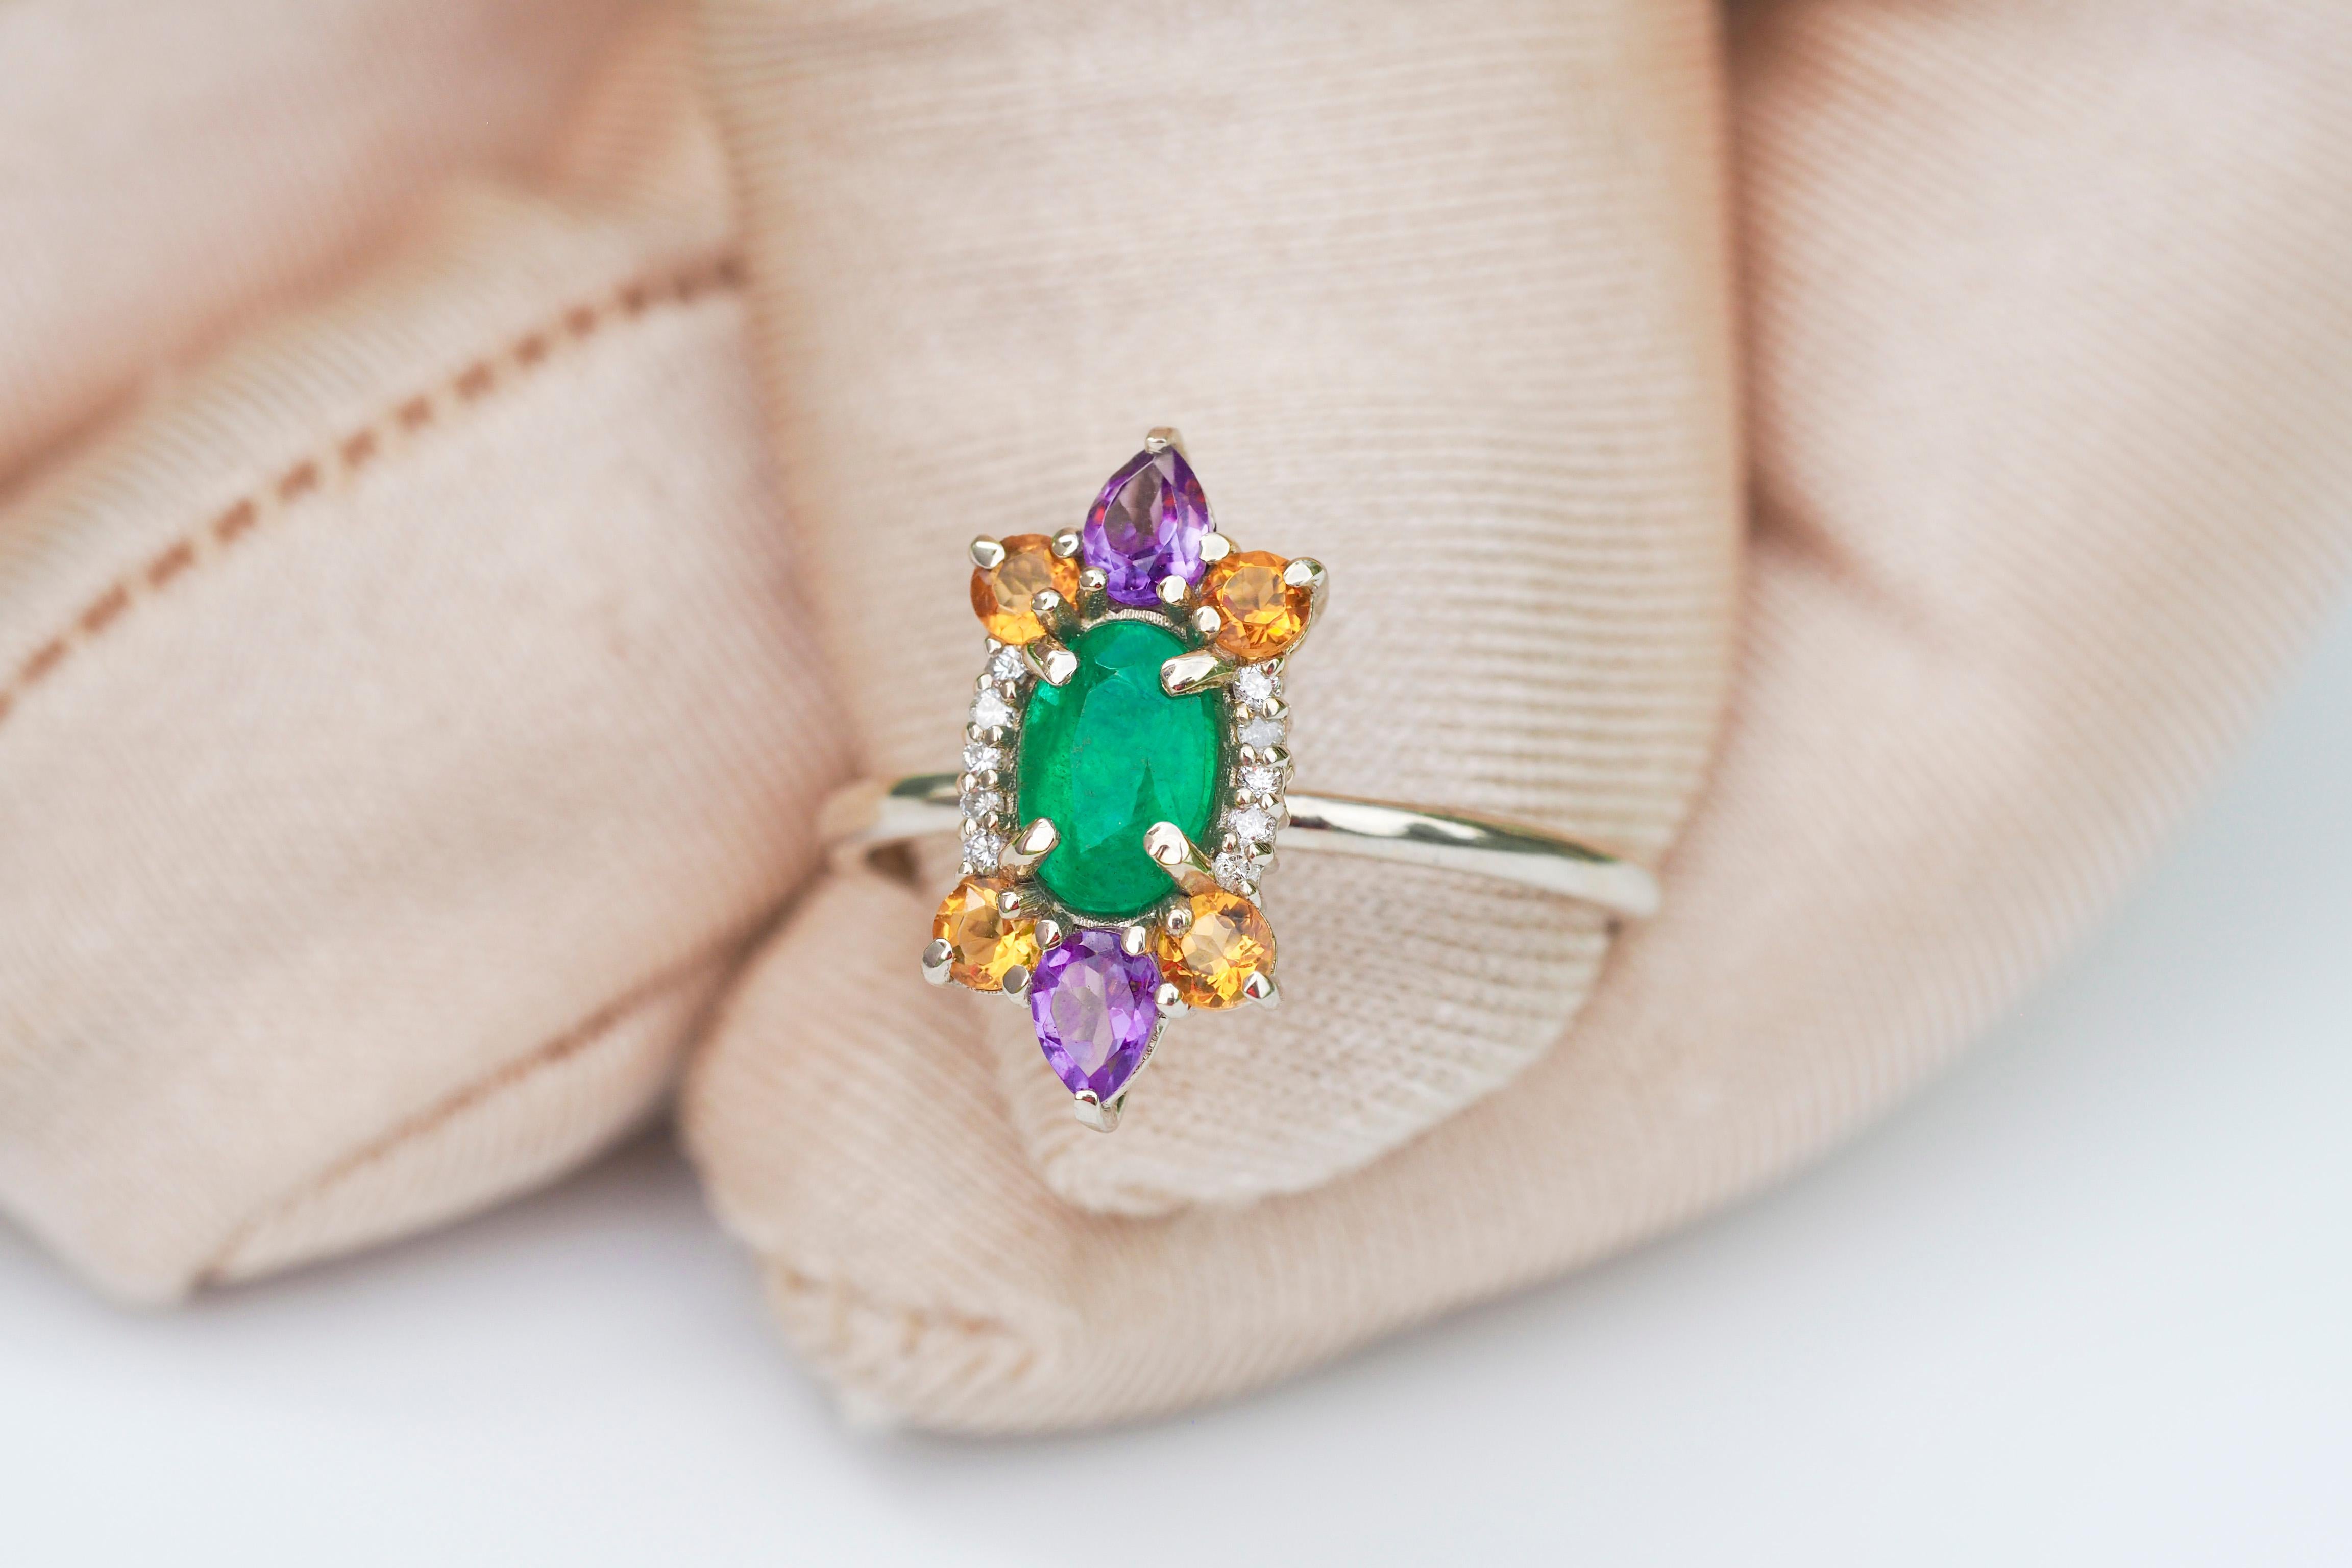 For Sale:  14 K Gold Ring with Oval Emerald, Sapphires, Amethysts and Diamonds! 10